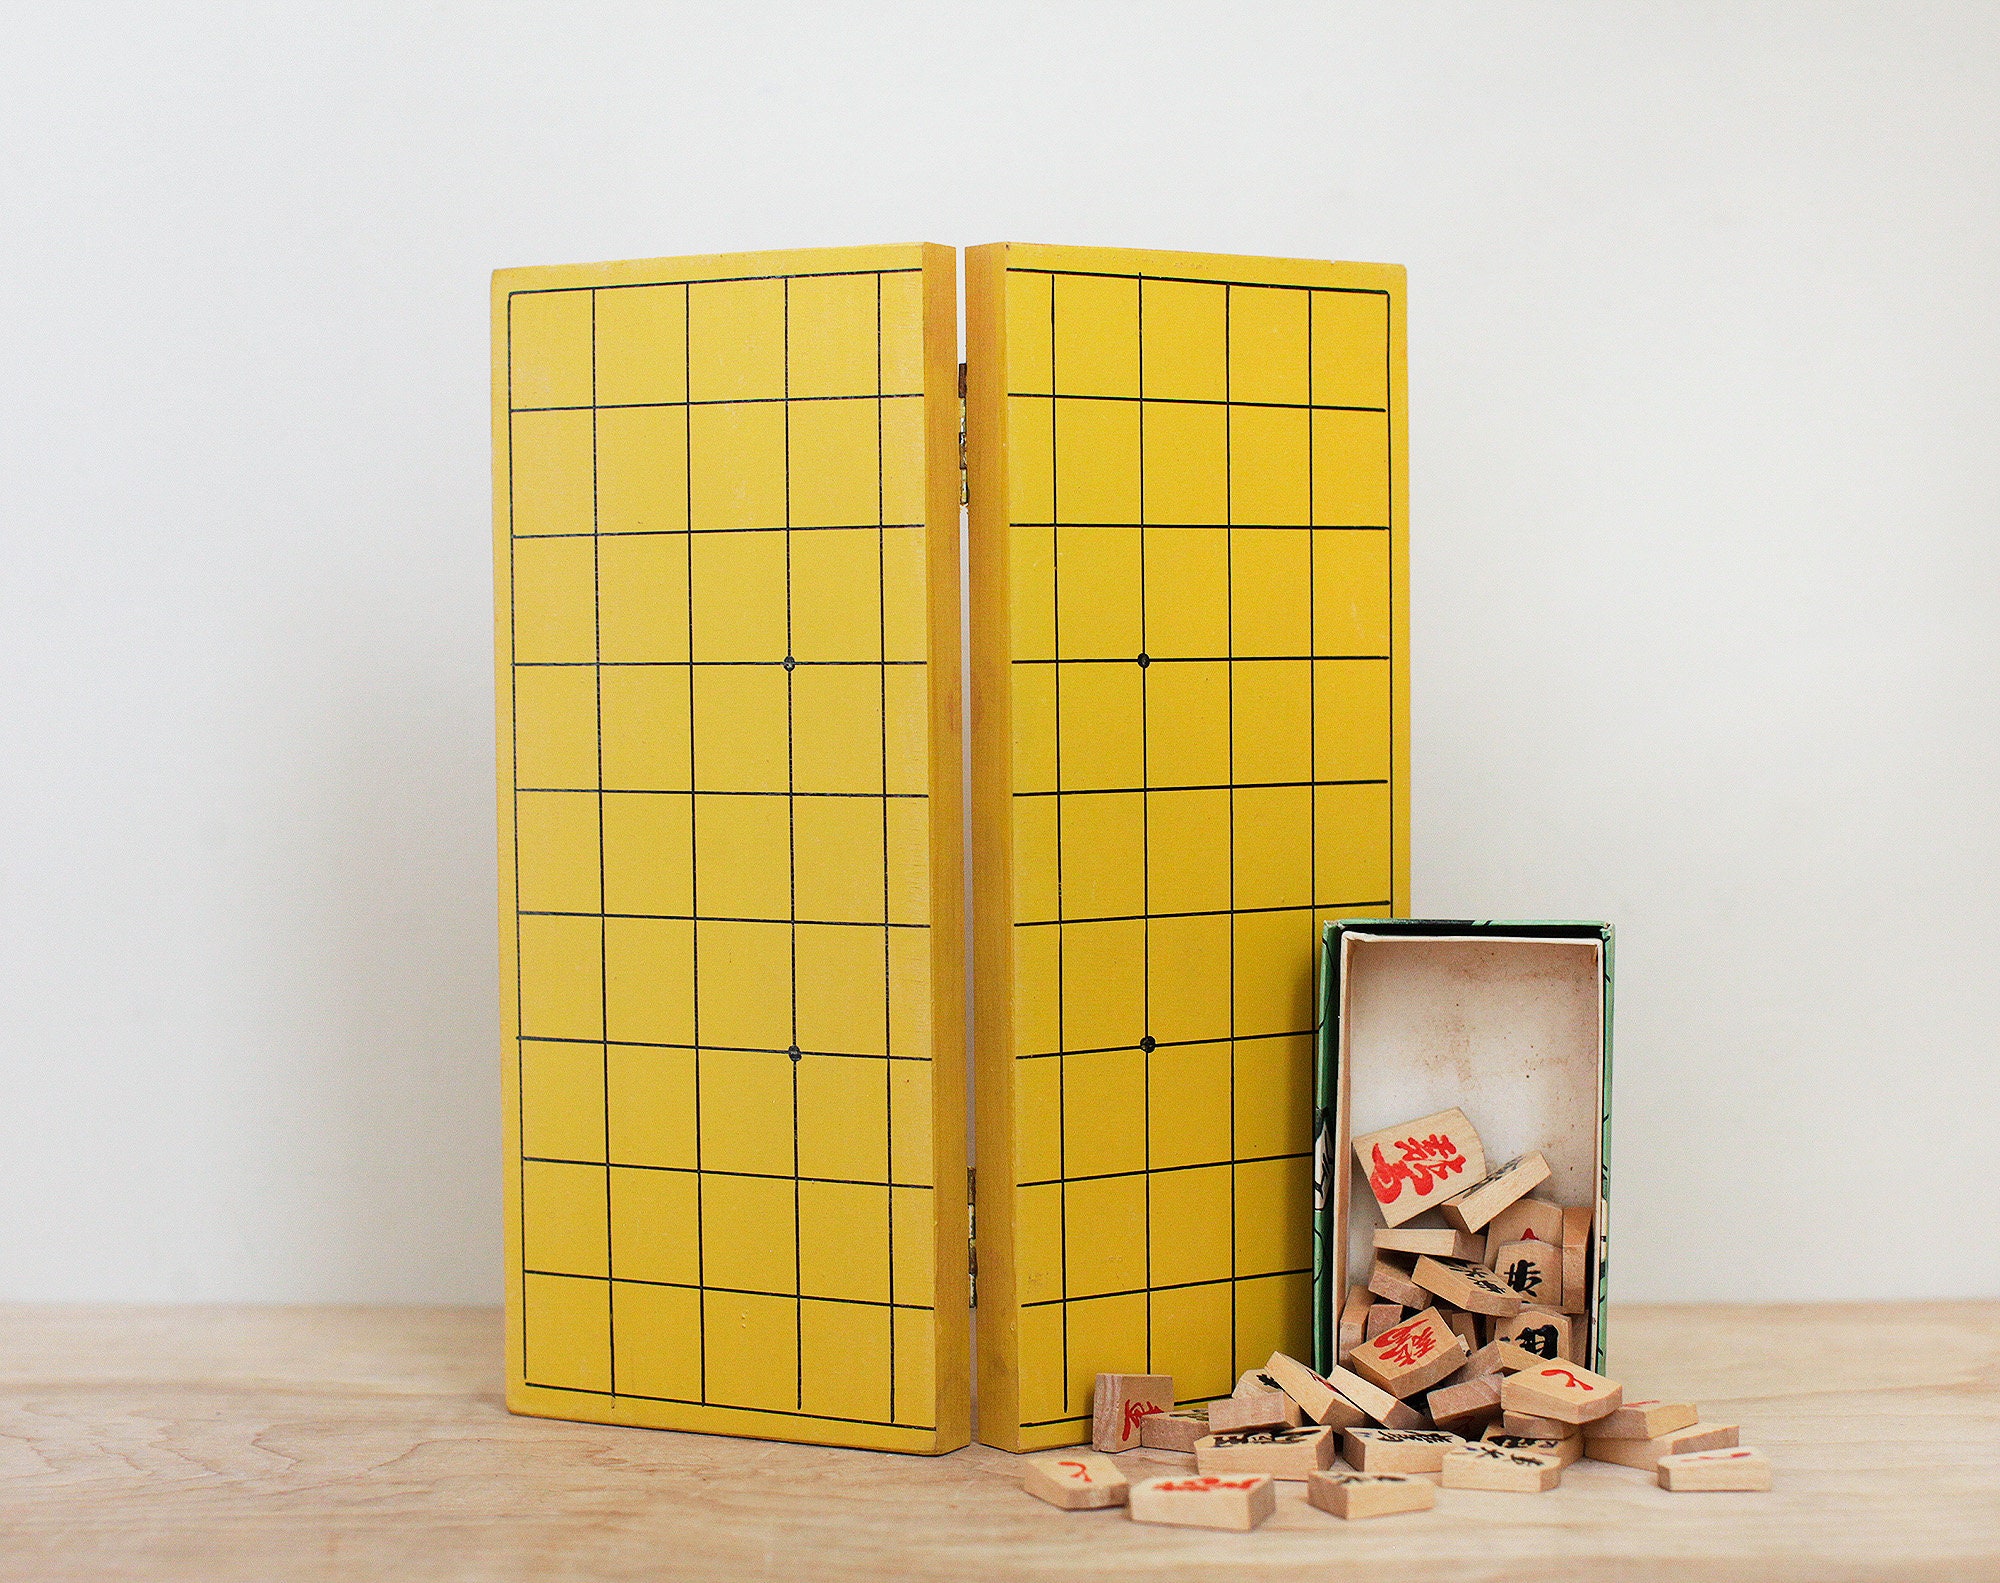  Yellow Mountain Imports Shogi Japanese Chess Game Set - Wooden  Board with Drawers and Traditional Koma Playing Pieces : Toys & Games